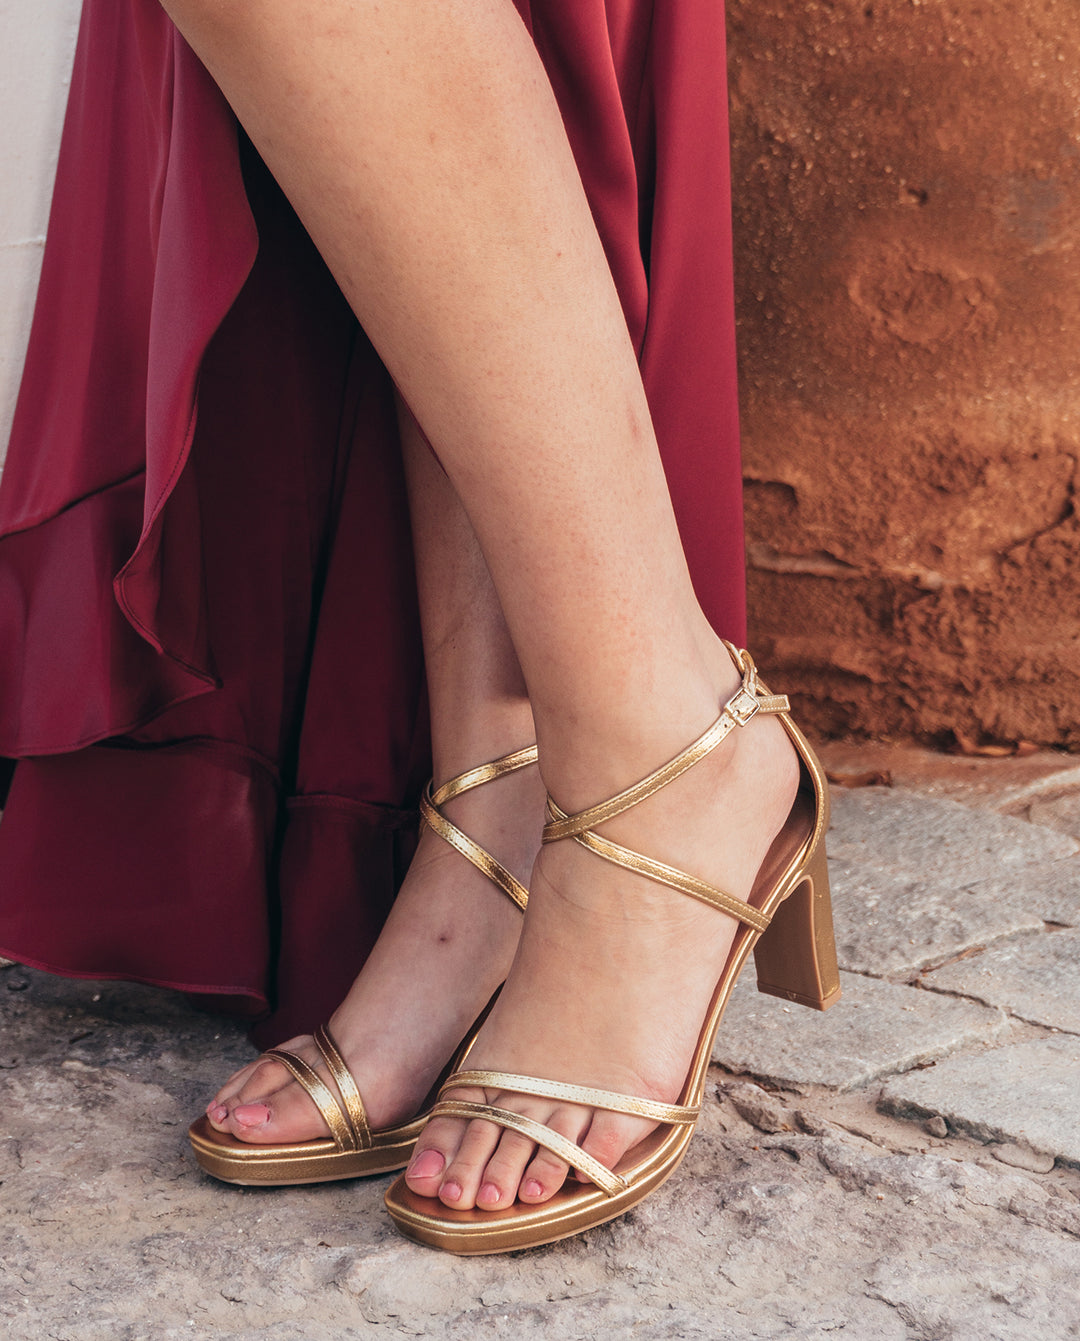 GOLDEN LUCIANA PARTY SHOES